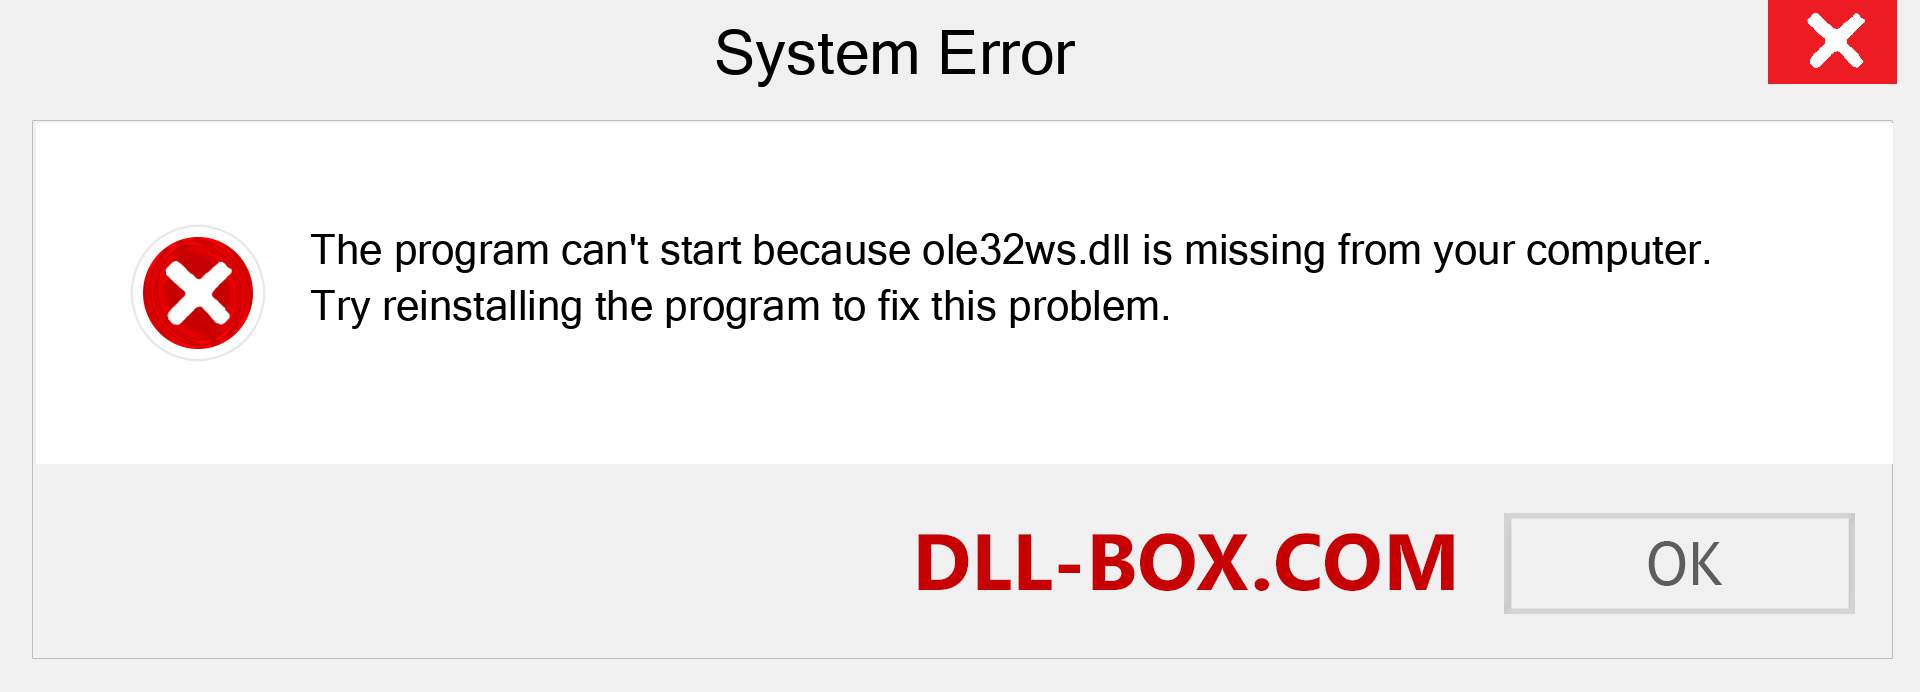  ole32ws.dll file is missing?. Download for Windows 7, 8, 10 - Fix  ole32ws dll Missing Error on Windows, photos, images